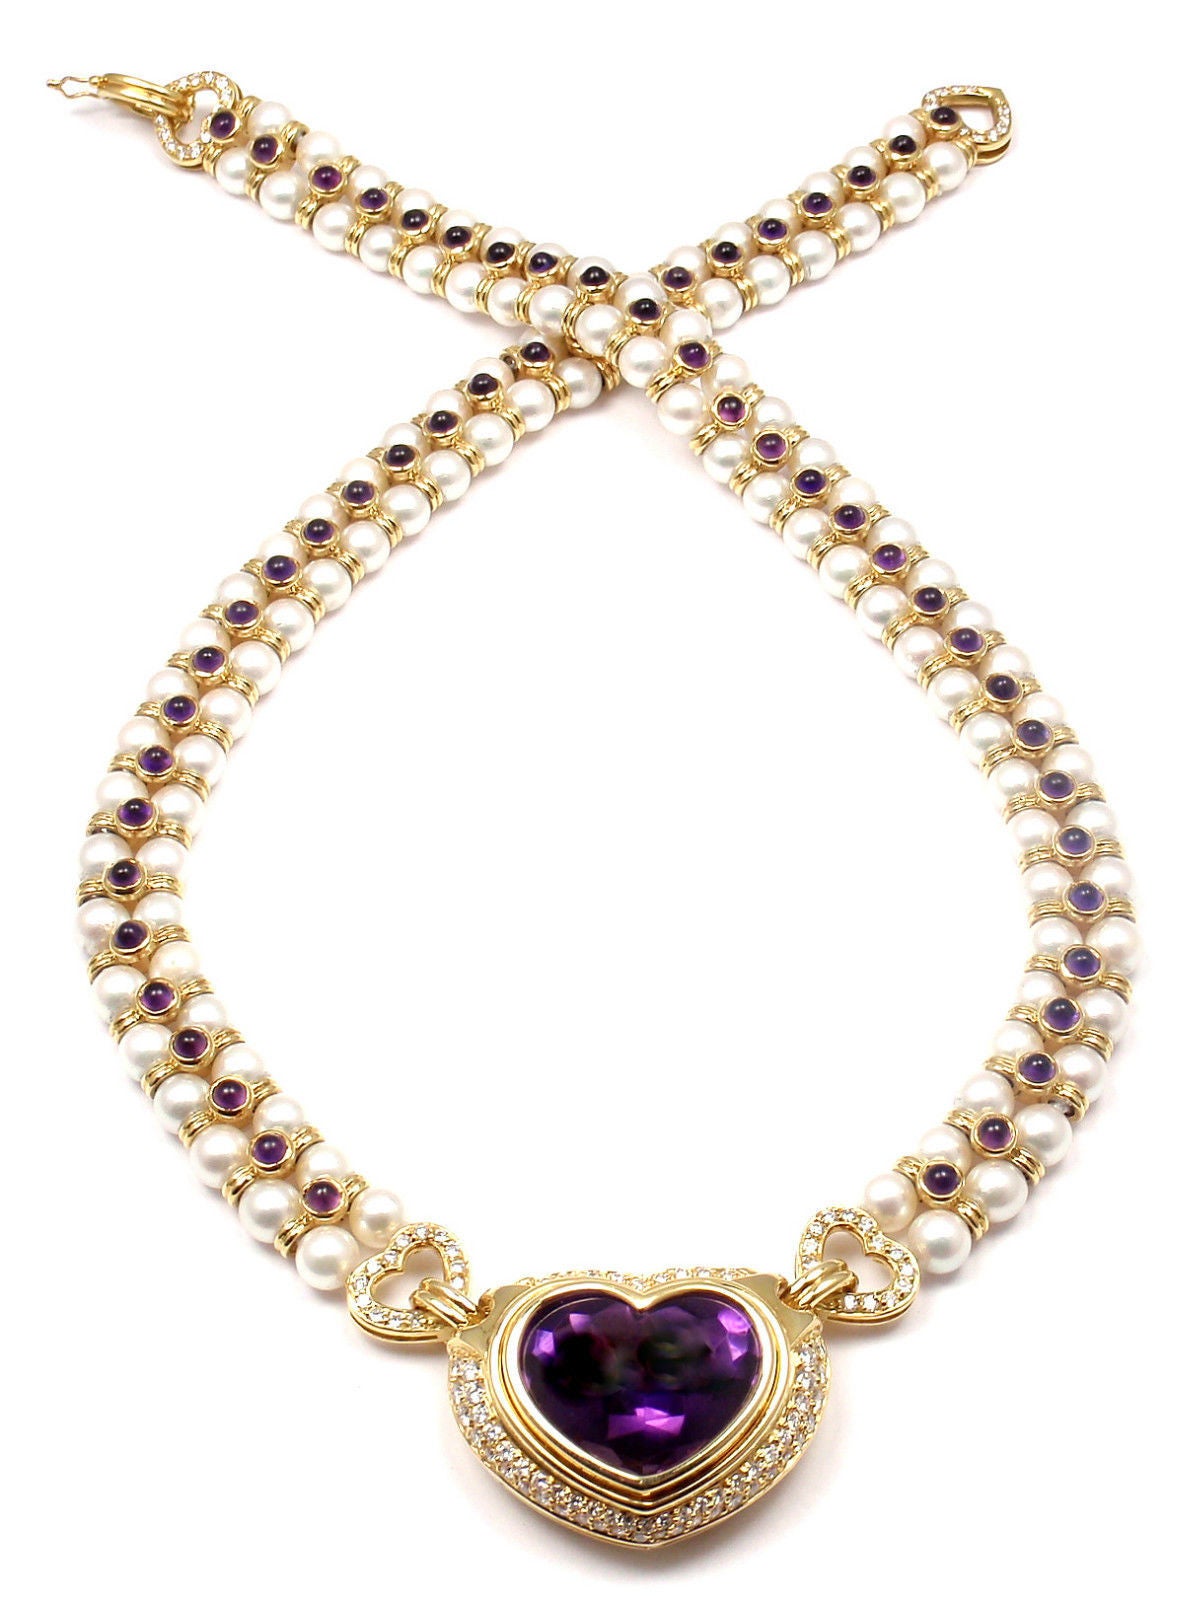 18k Yellow Gold Diamond Amethyst Pearl Necklace by Bulgari.
With 110 round brilliant cut diamonds VS1 clarity, G color total weight approx. 2.5ct
1 Large heart shape amethyst 22mm x 19mm
56 round amethysts 3mm each
112 cultured round pearls 6mm